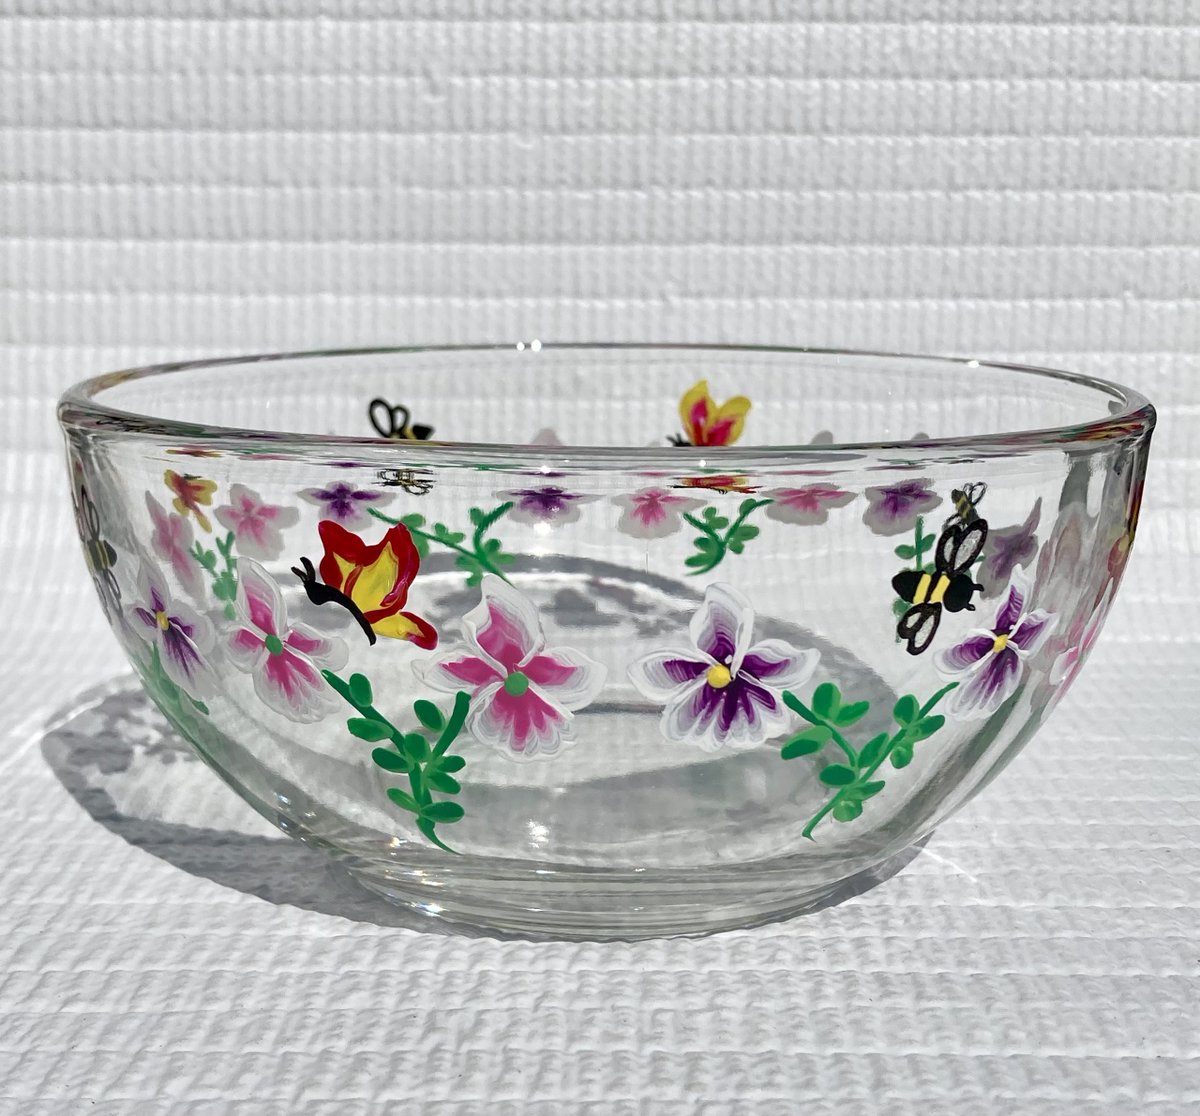 Check out this hand painted bowl etsy.com/listing/169454… #handpaintedbowl #candydish #homedecor #SMILEtt23 #craftBizParty #etsystore